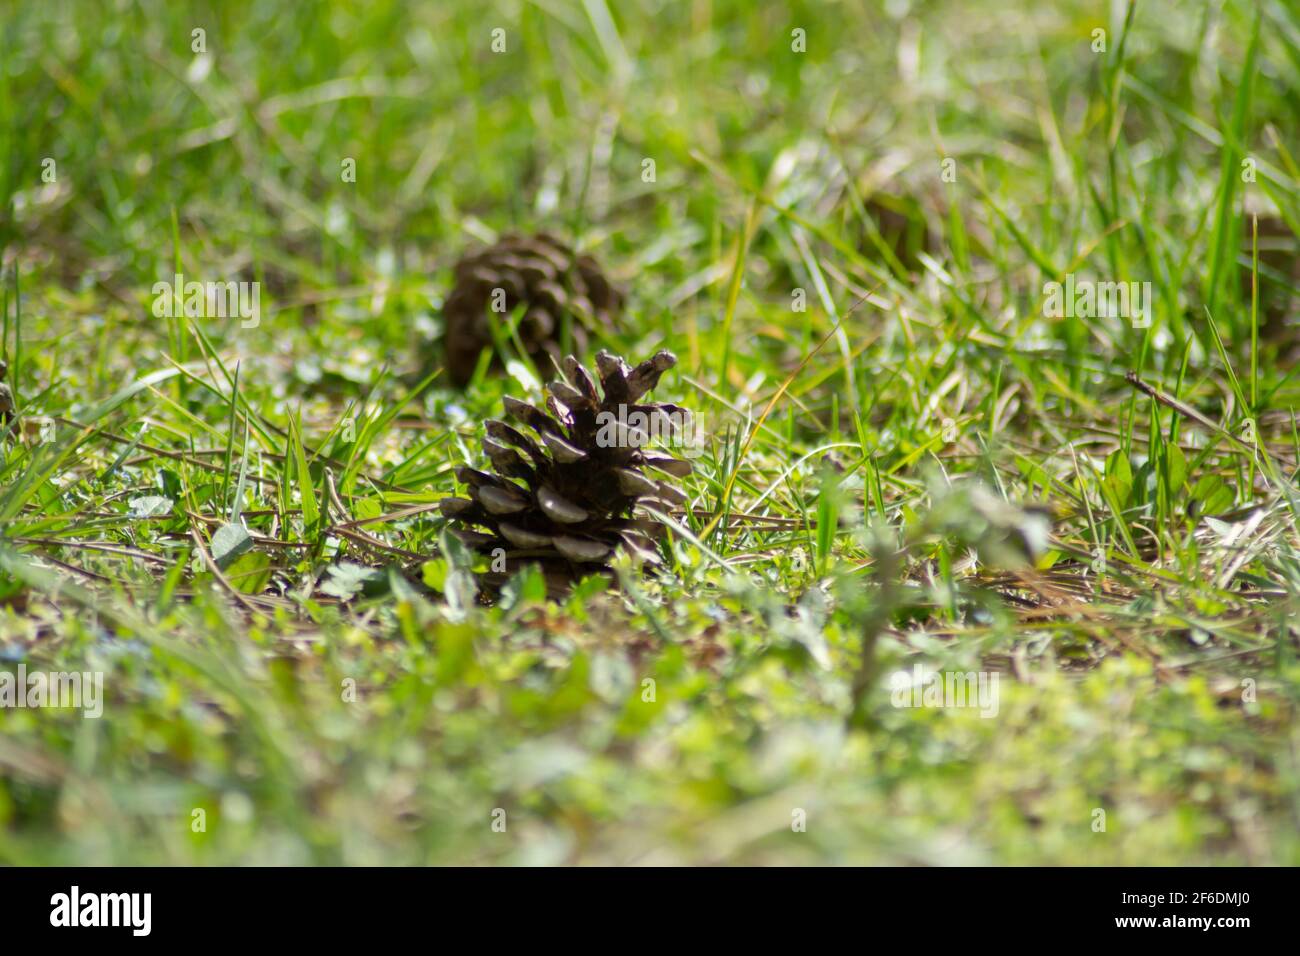 Pinecones on the ground, nature’s beauty, early spring season, fallen cones from a tree Stock Photo